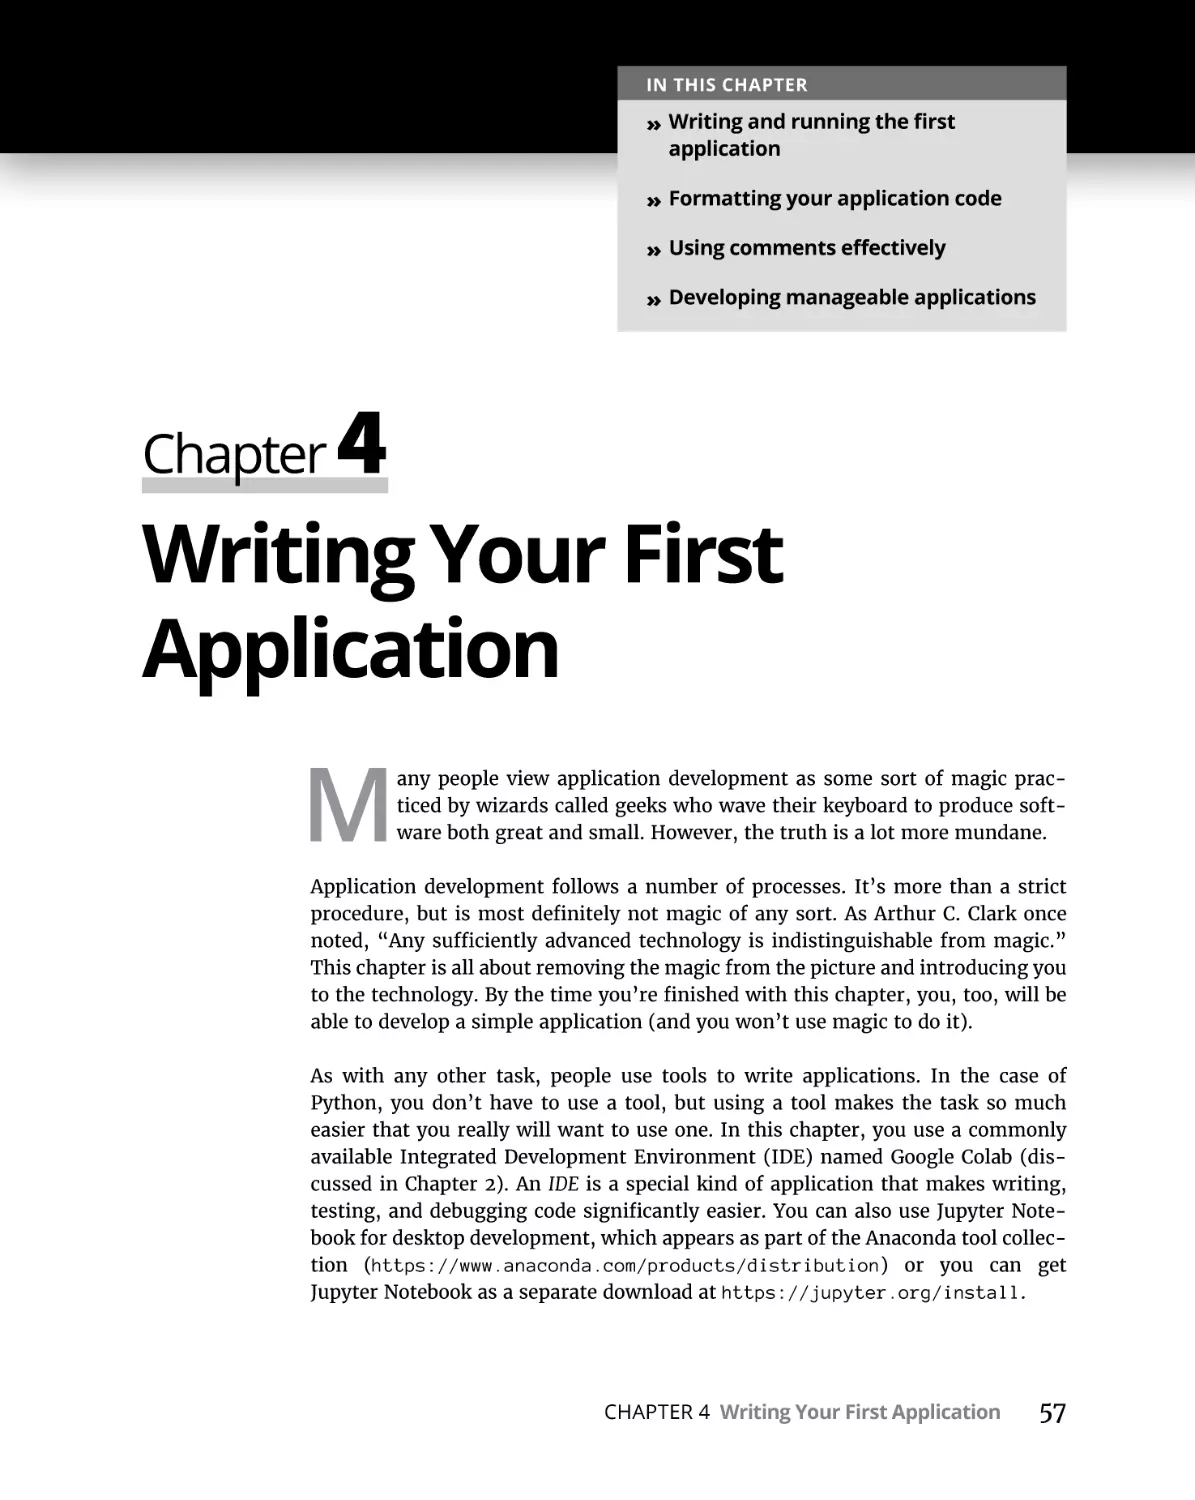 Chapter 4 Writing Your First Application